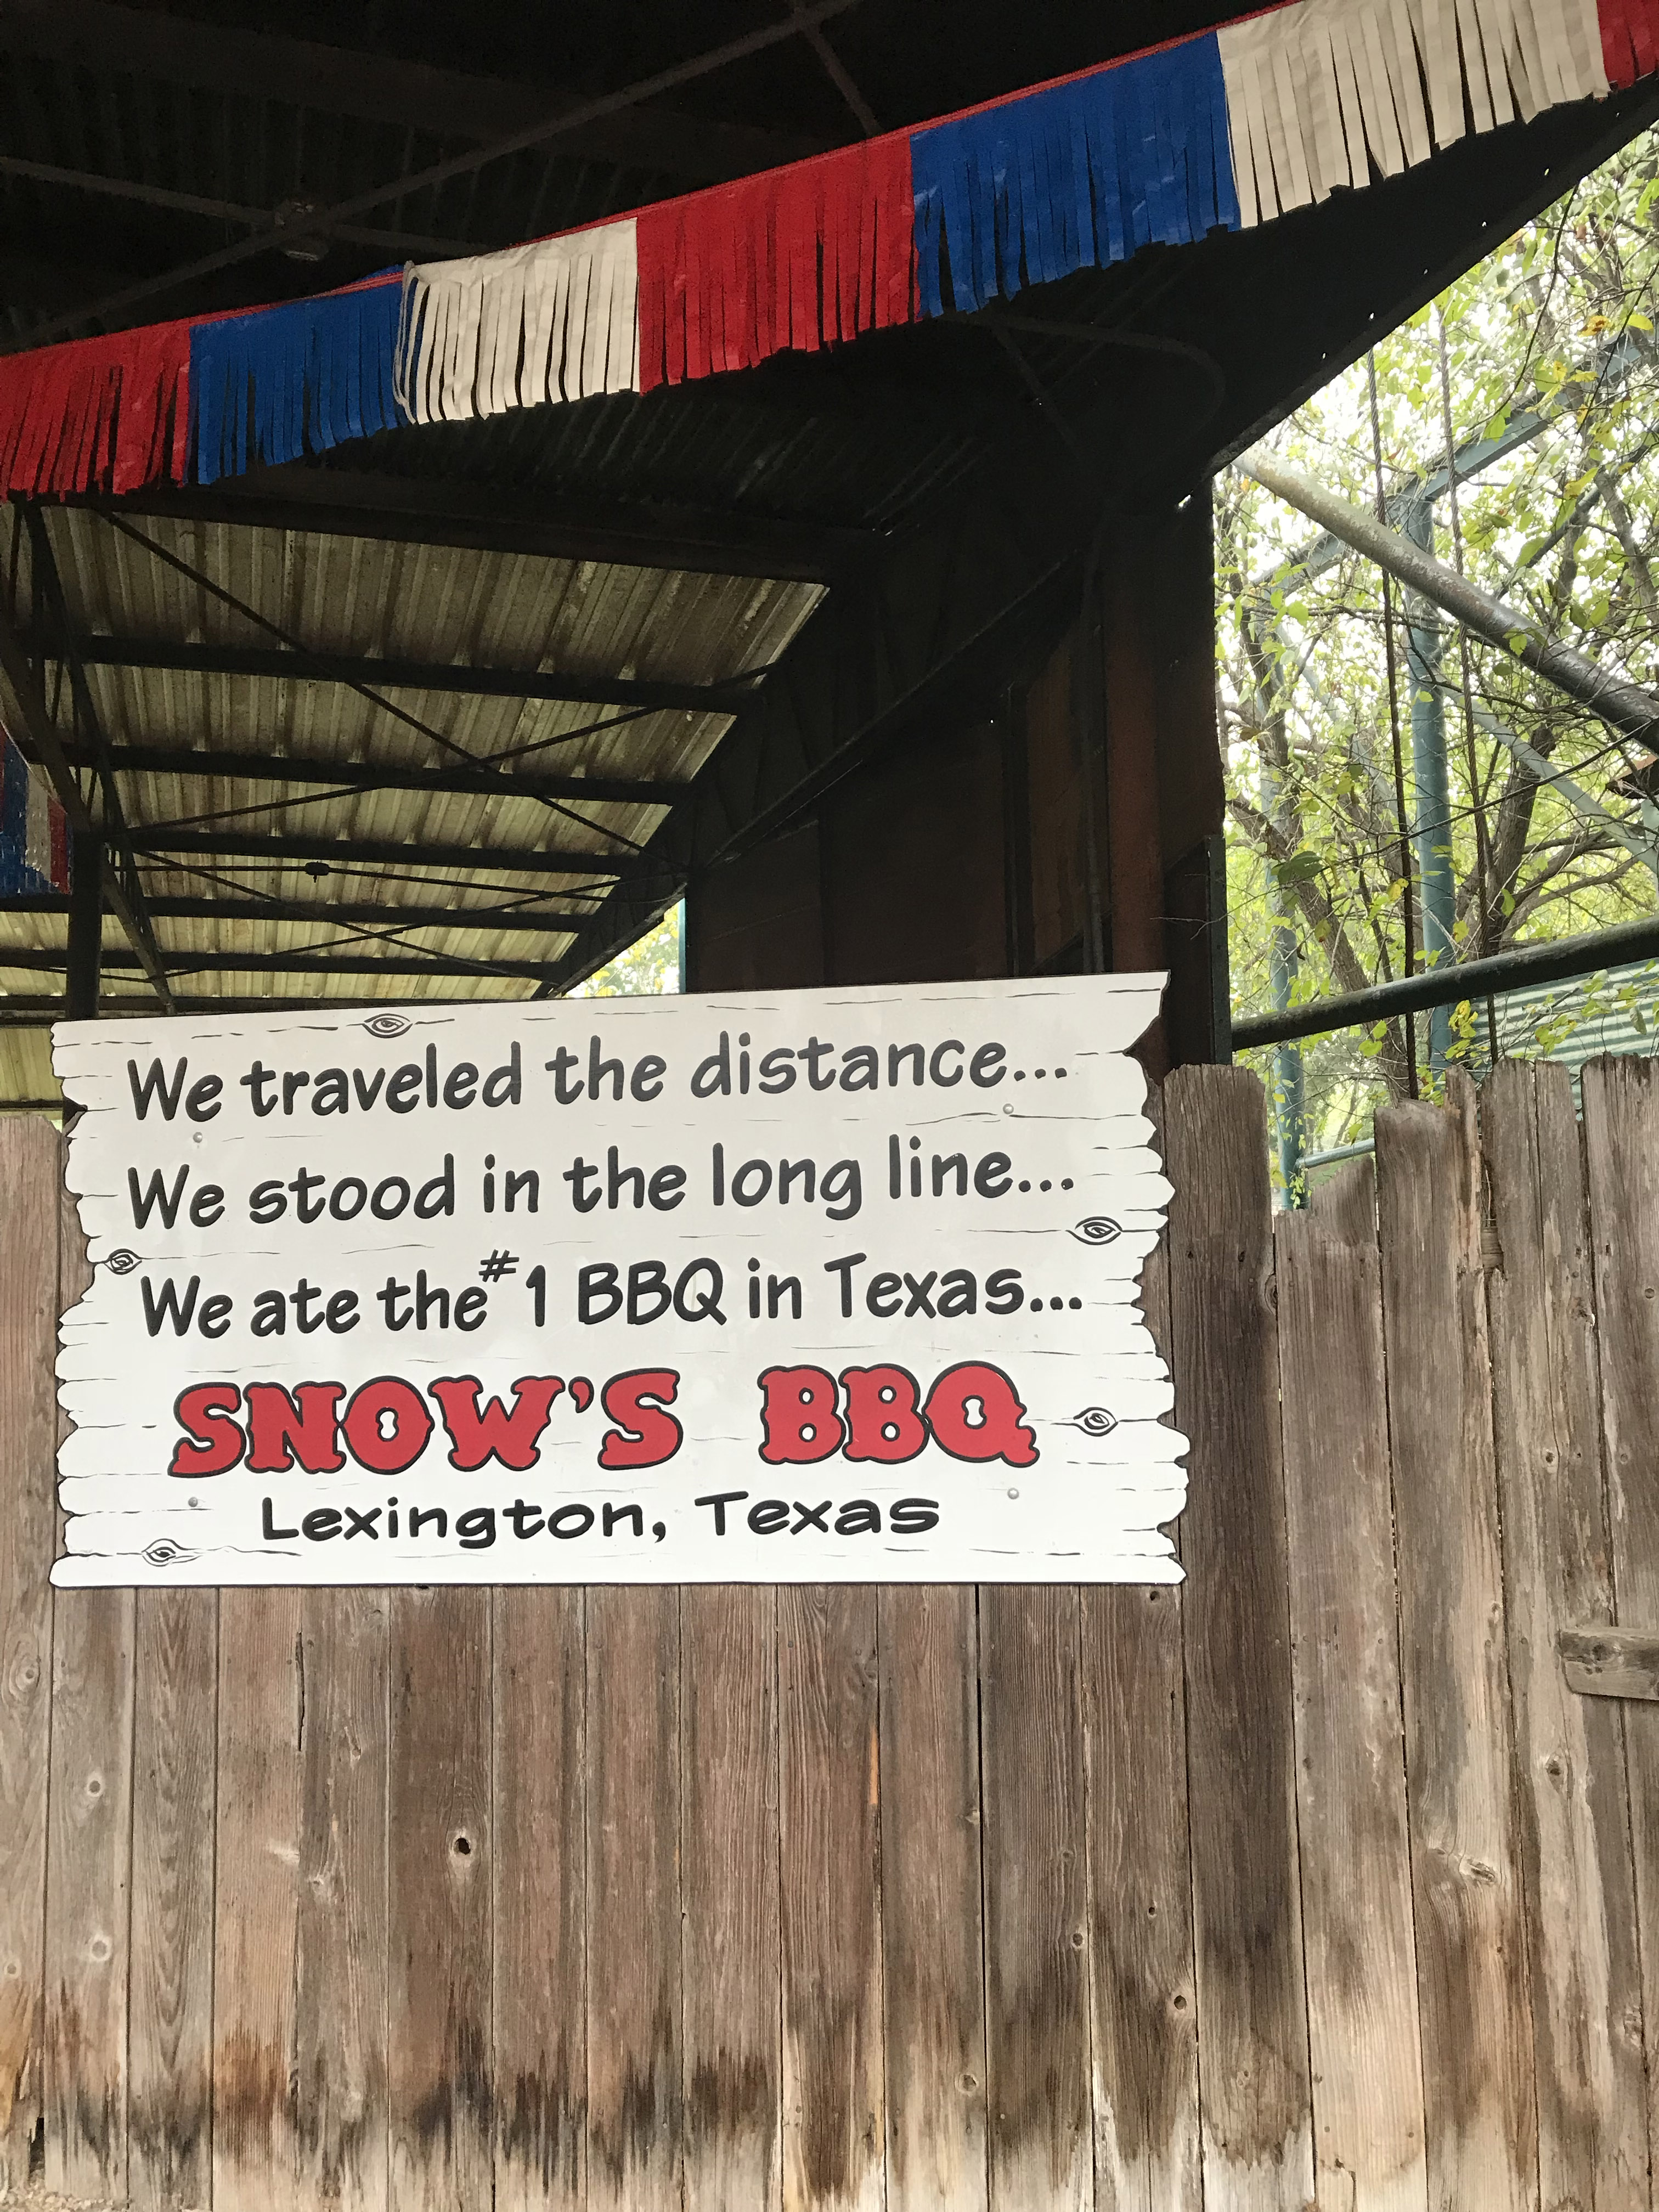 A sign at Snow's BBQ in Lexington Texas that reads "We traveled the distance. We stood in the long line. We ate the #1 BBQ in Texas. Snow's BBQ.